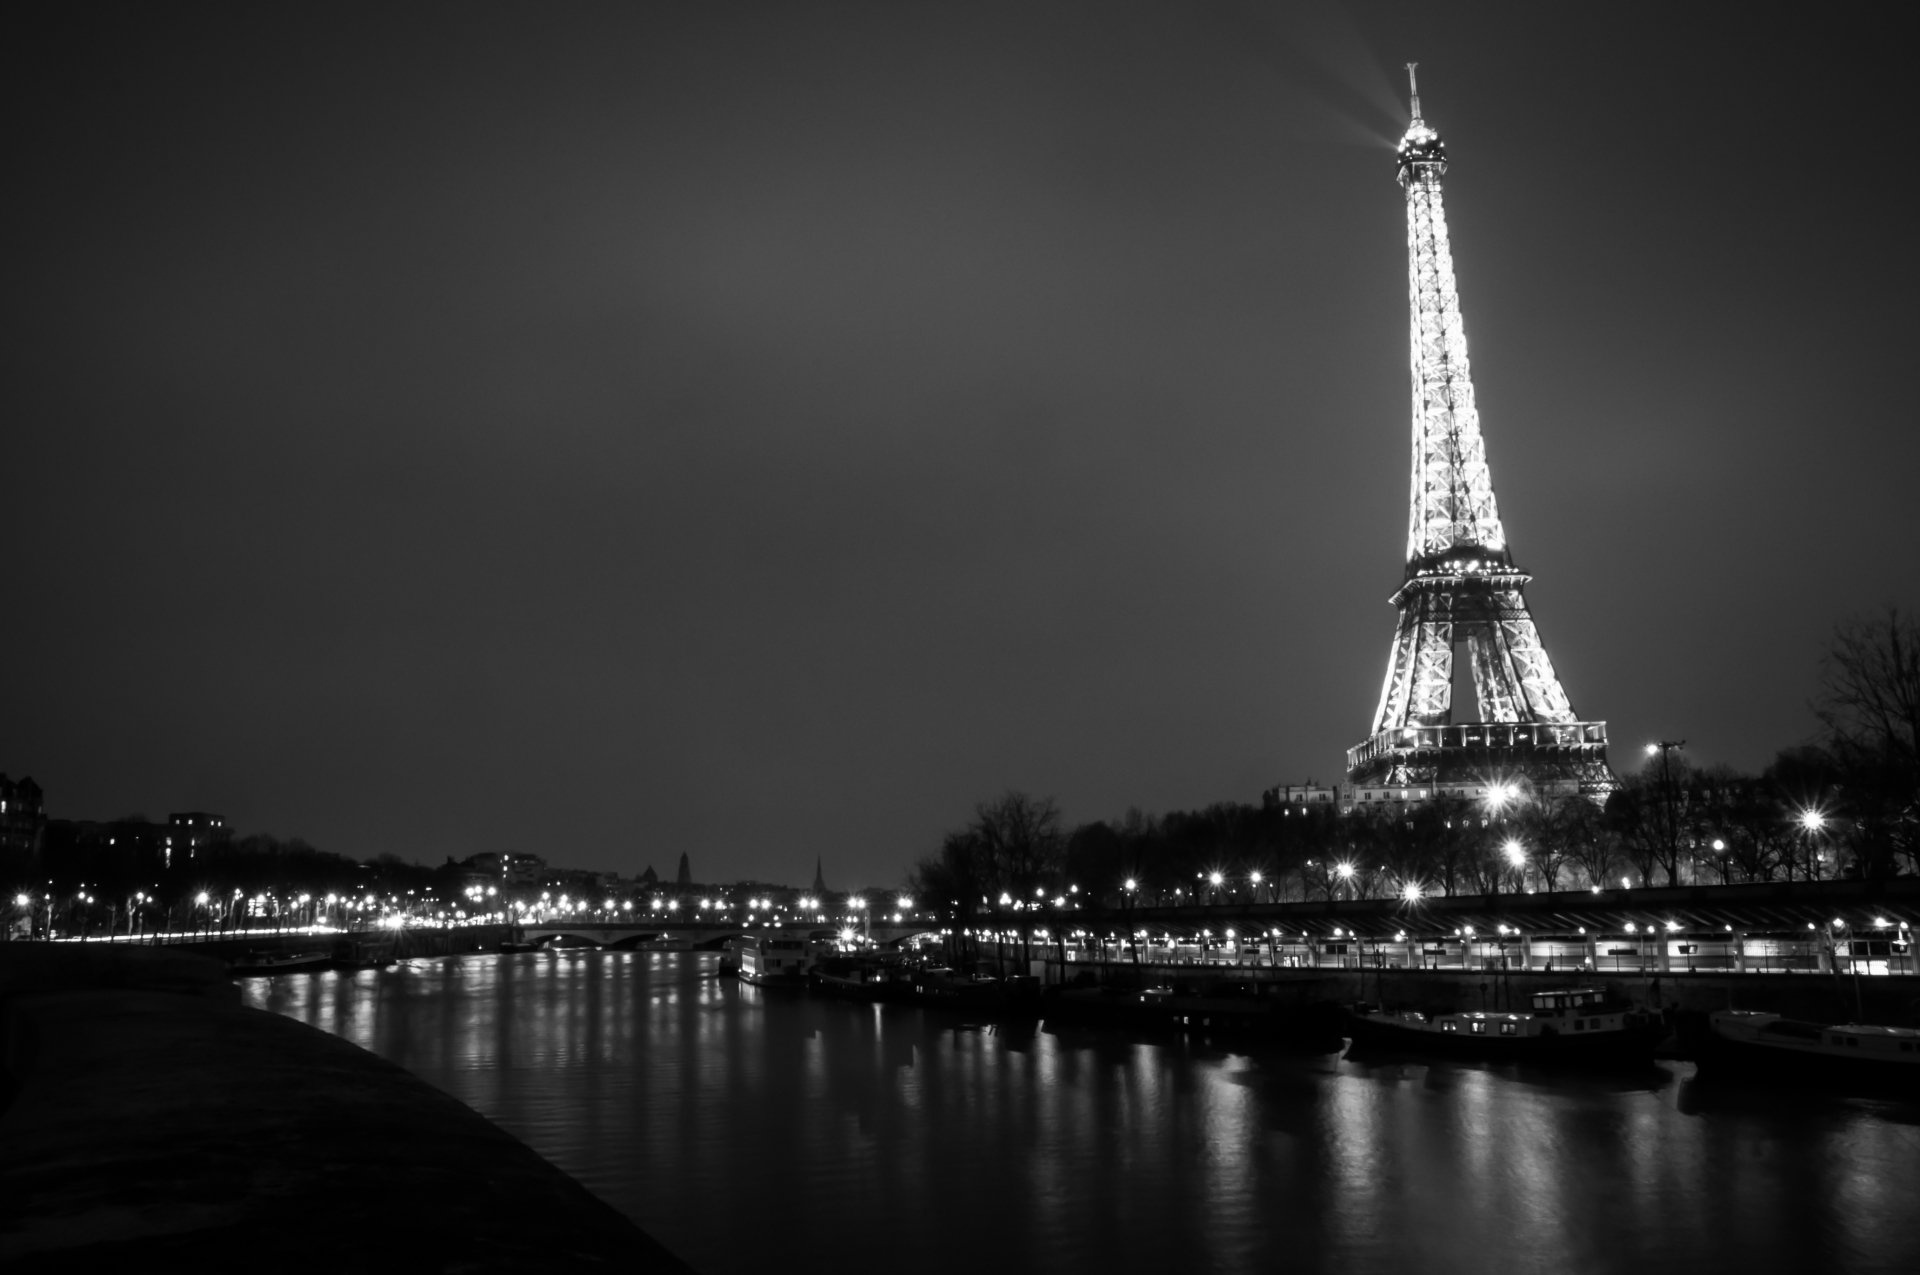 Paris: The French capital, Black-and-white, Nightscape. 1920x1280 HD Wallpaper.